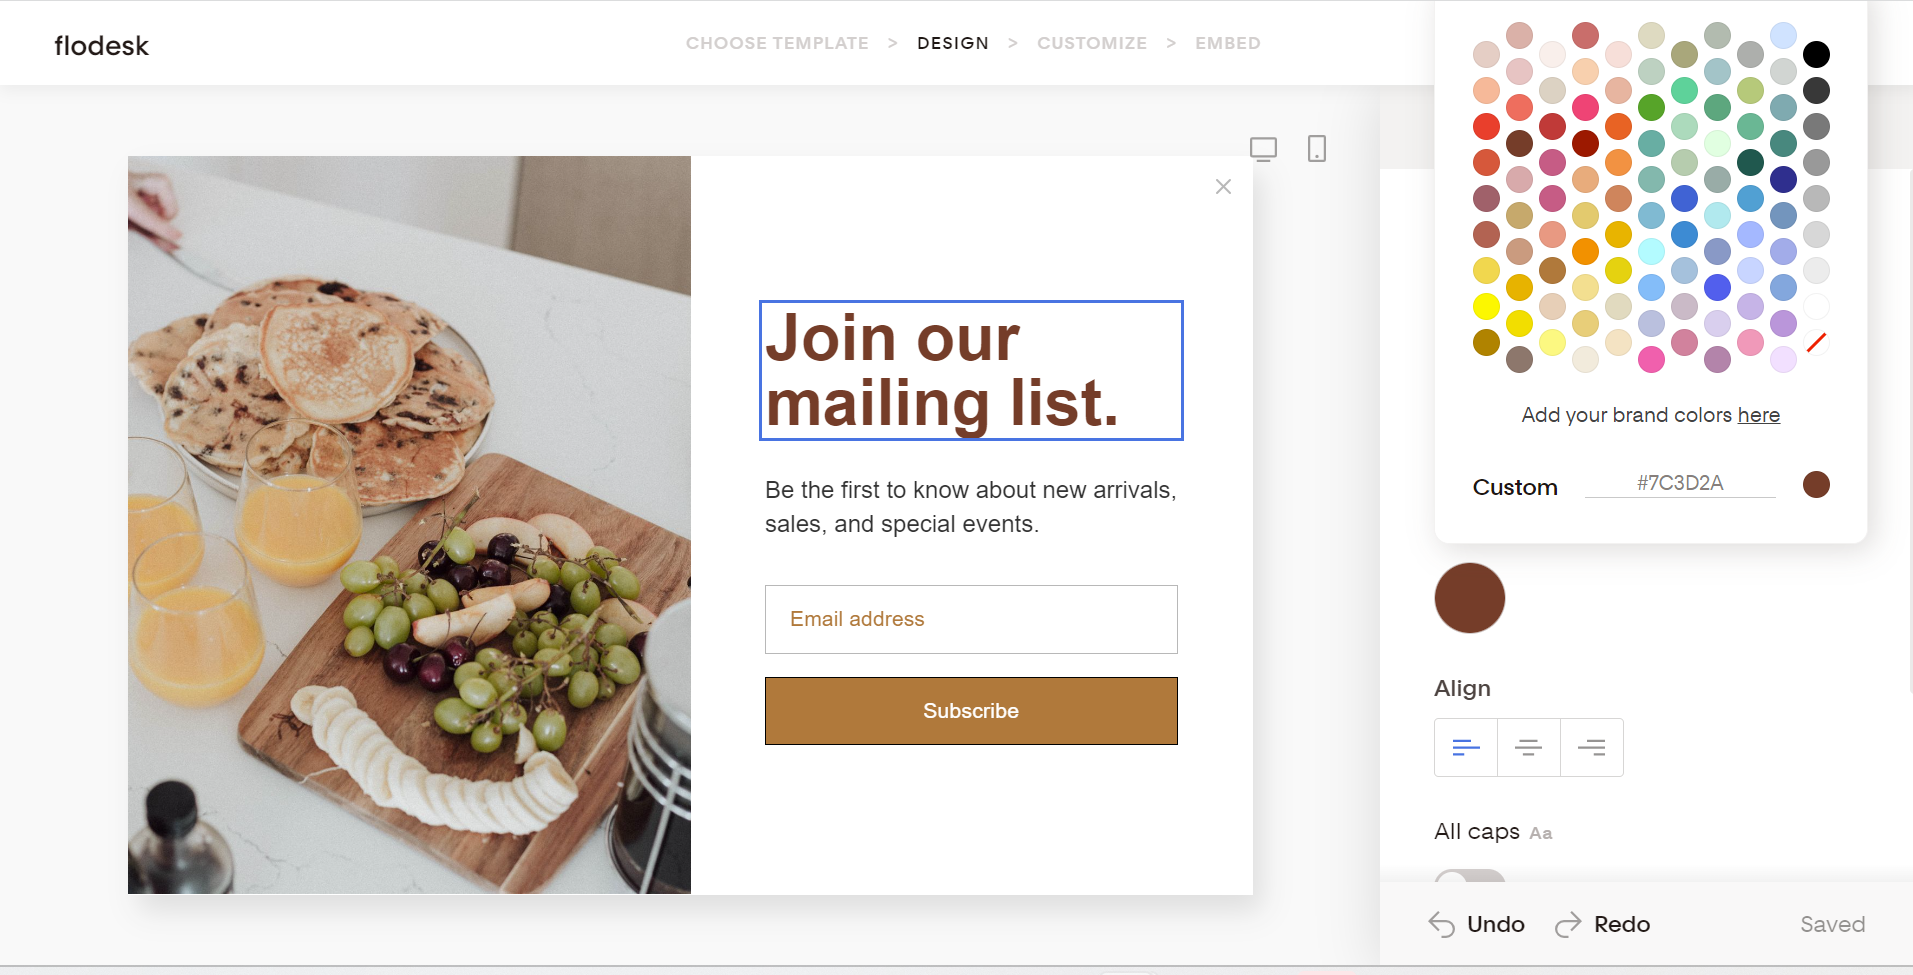 33 opt-in freebie ideas to jumpstart your email list - Flodesk Maven